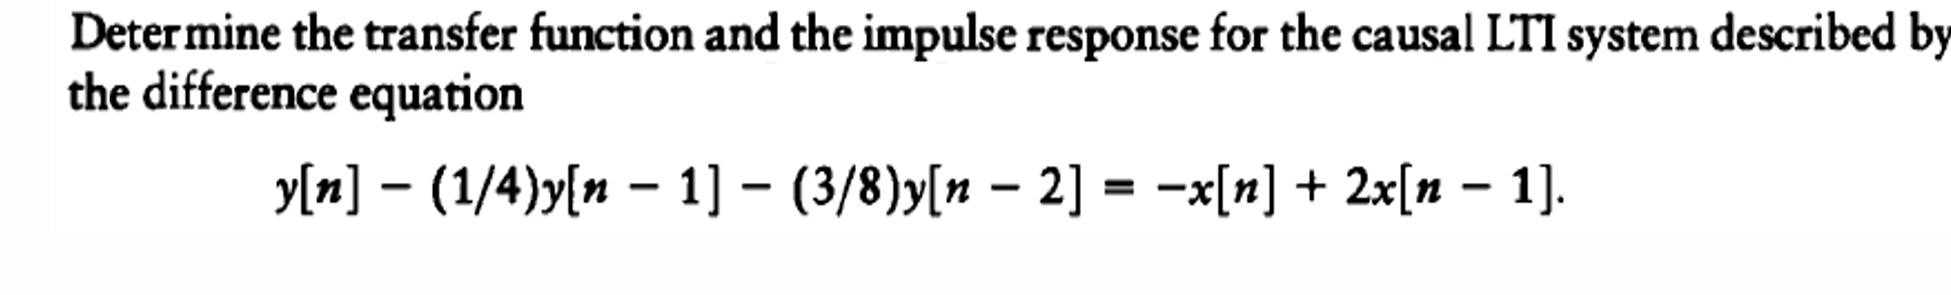 Determine the transfer function and the impulse response for the causal LTI system described by the